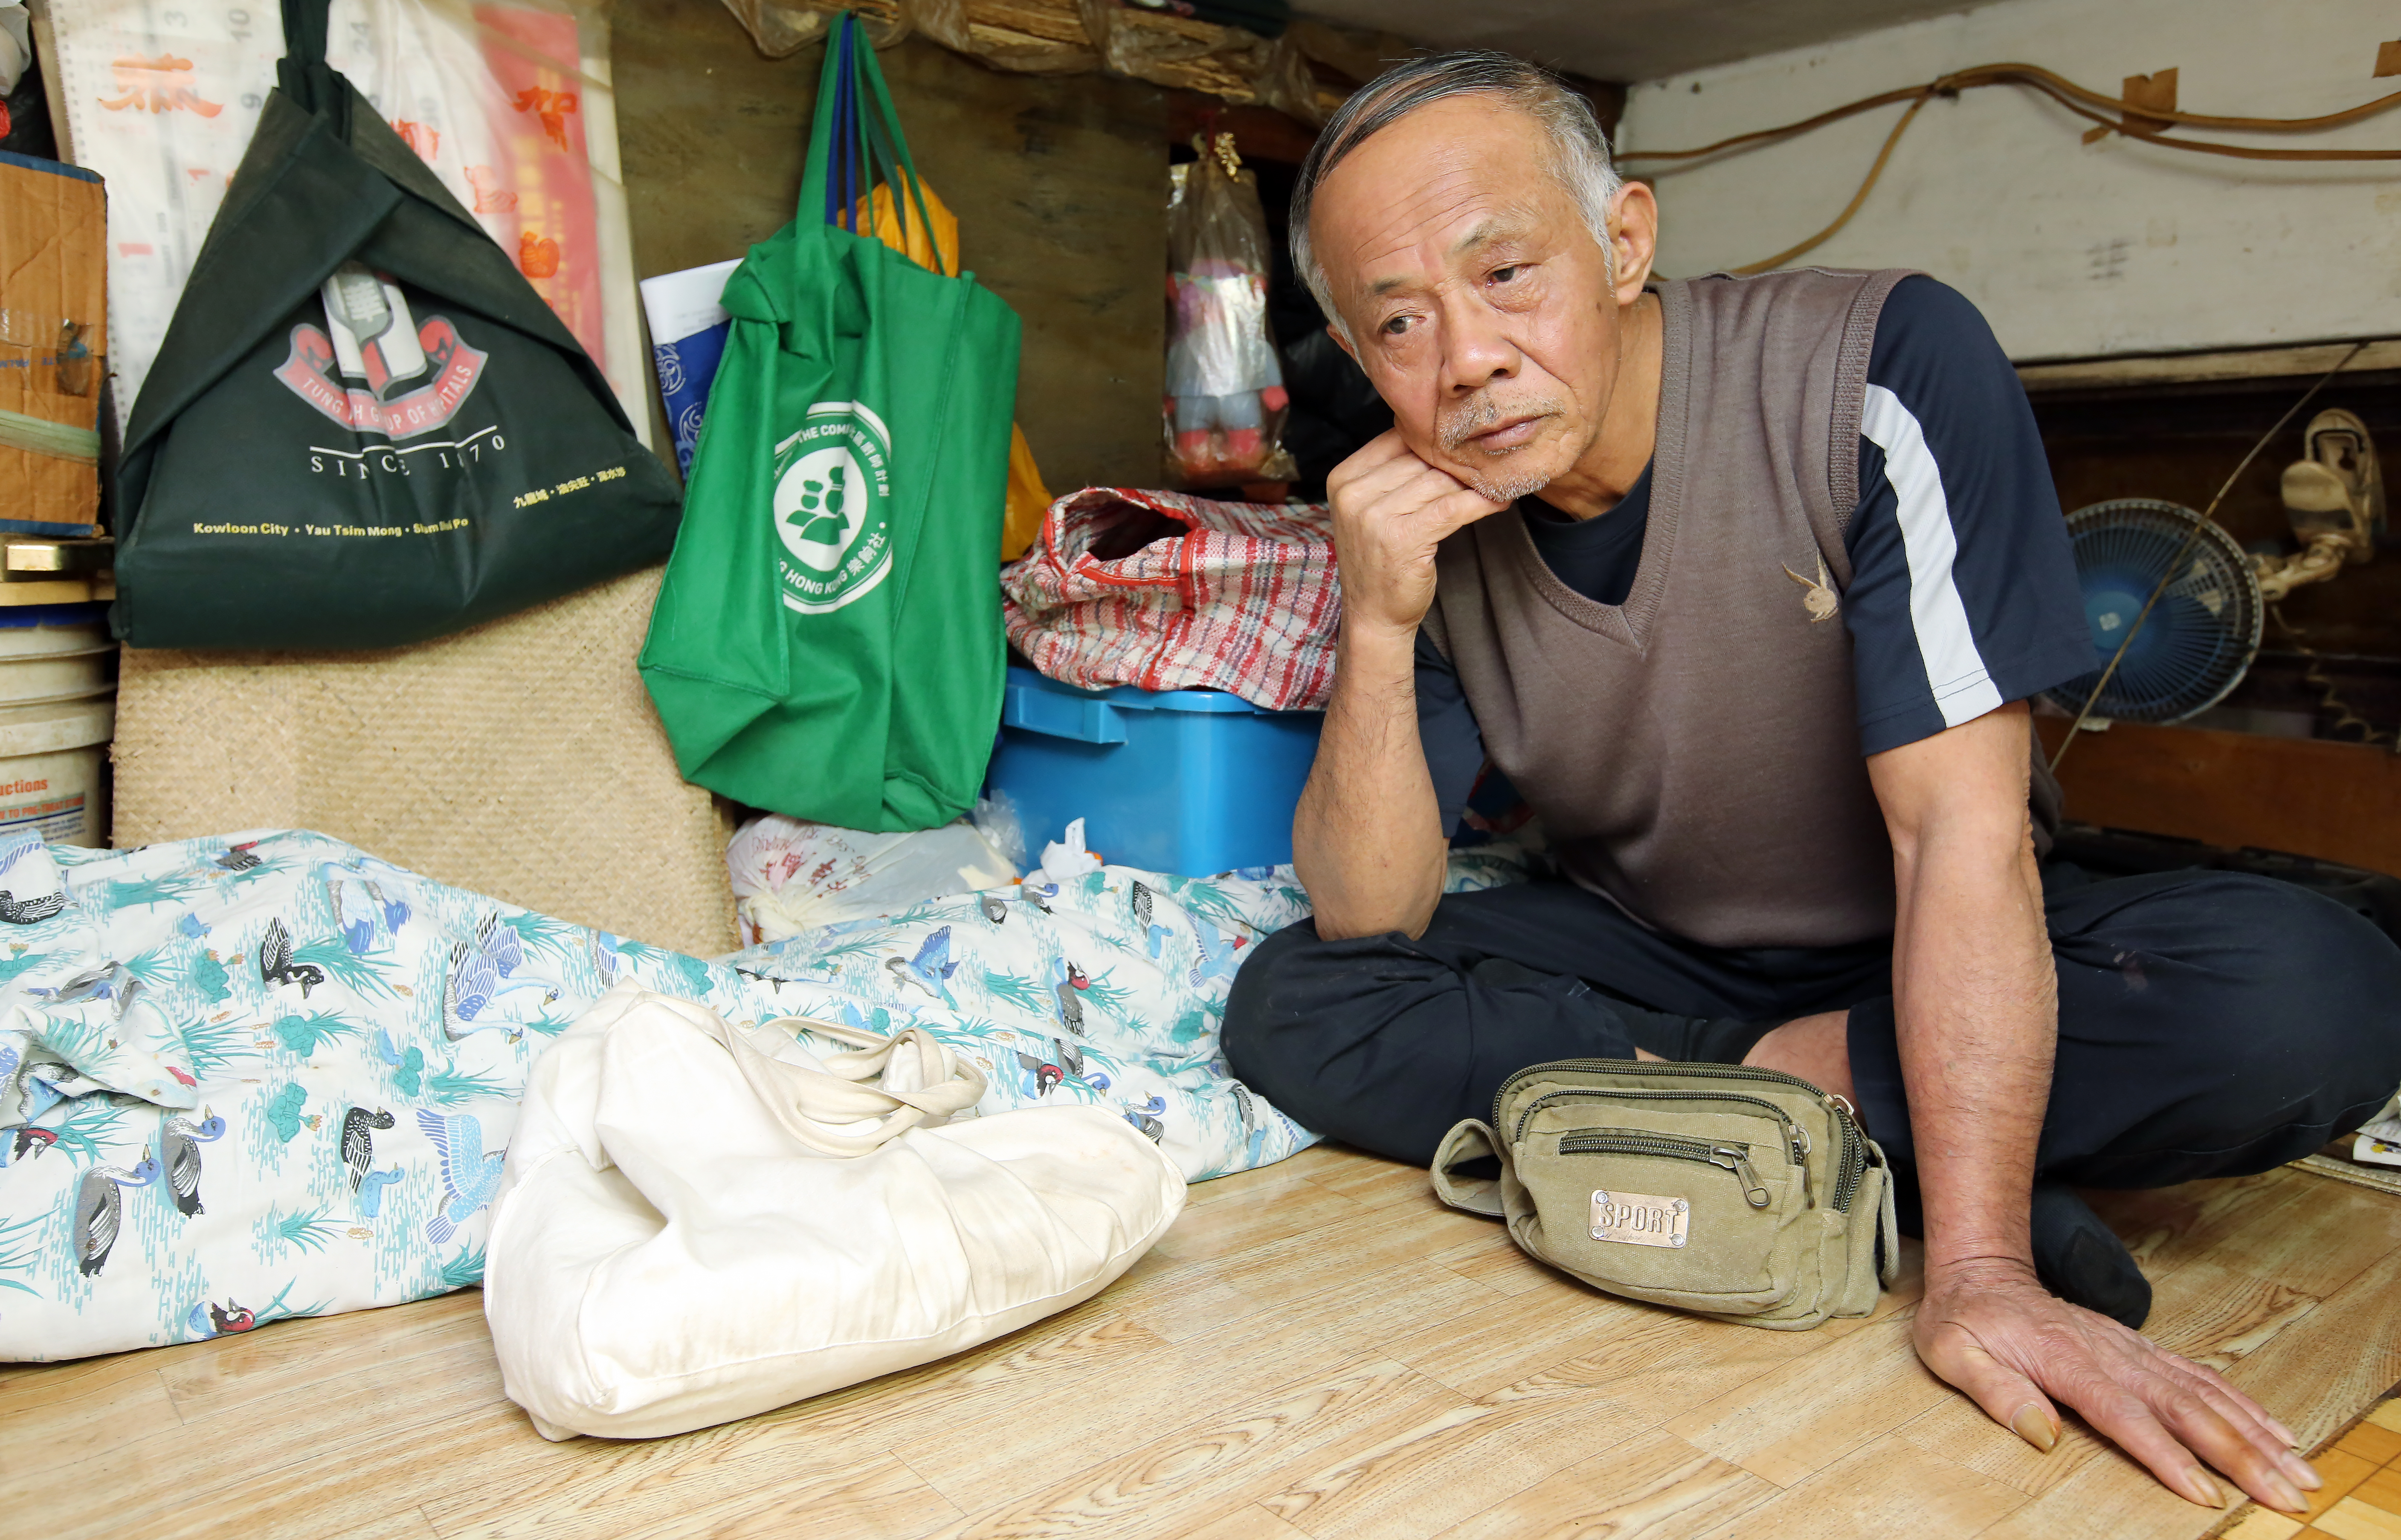 Interview 66-year-old Mr Lam, still working as a cleaner, for a story on Policy Address Sham Shui Po. 12JAN16 SCMP/ Edward Wong